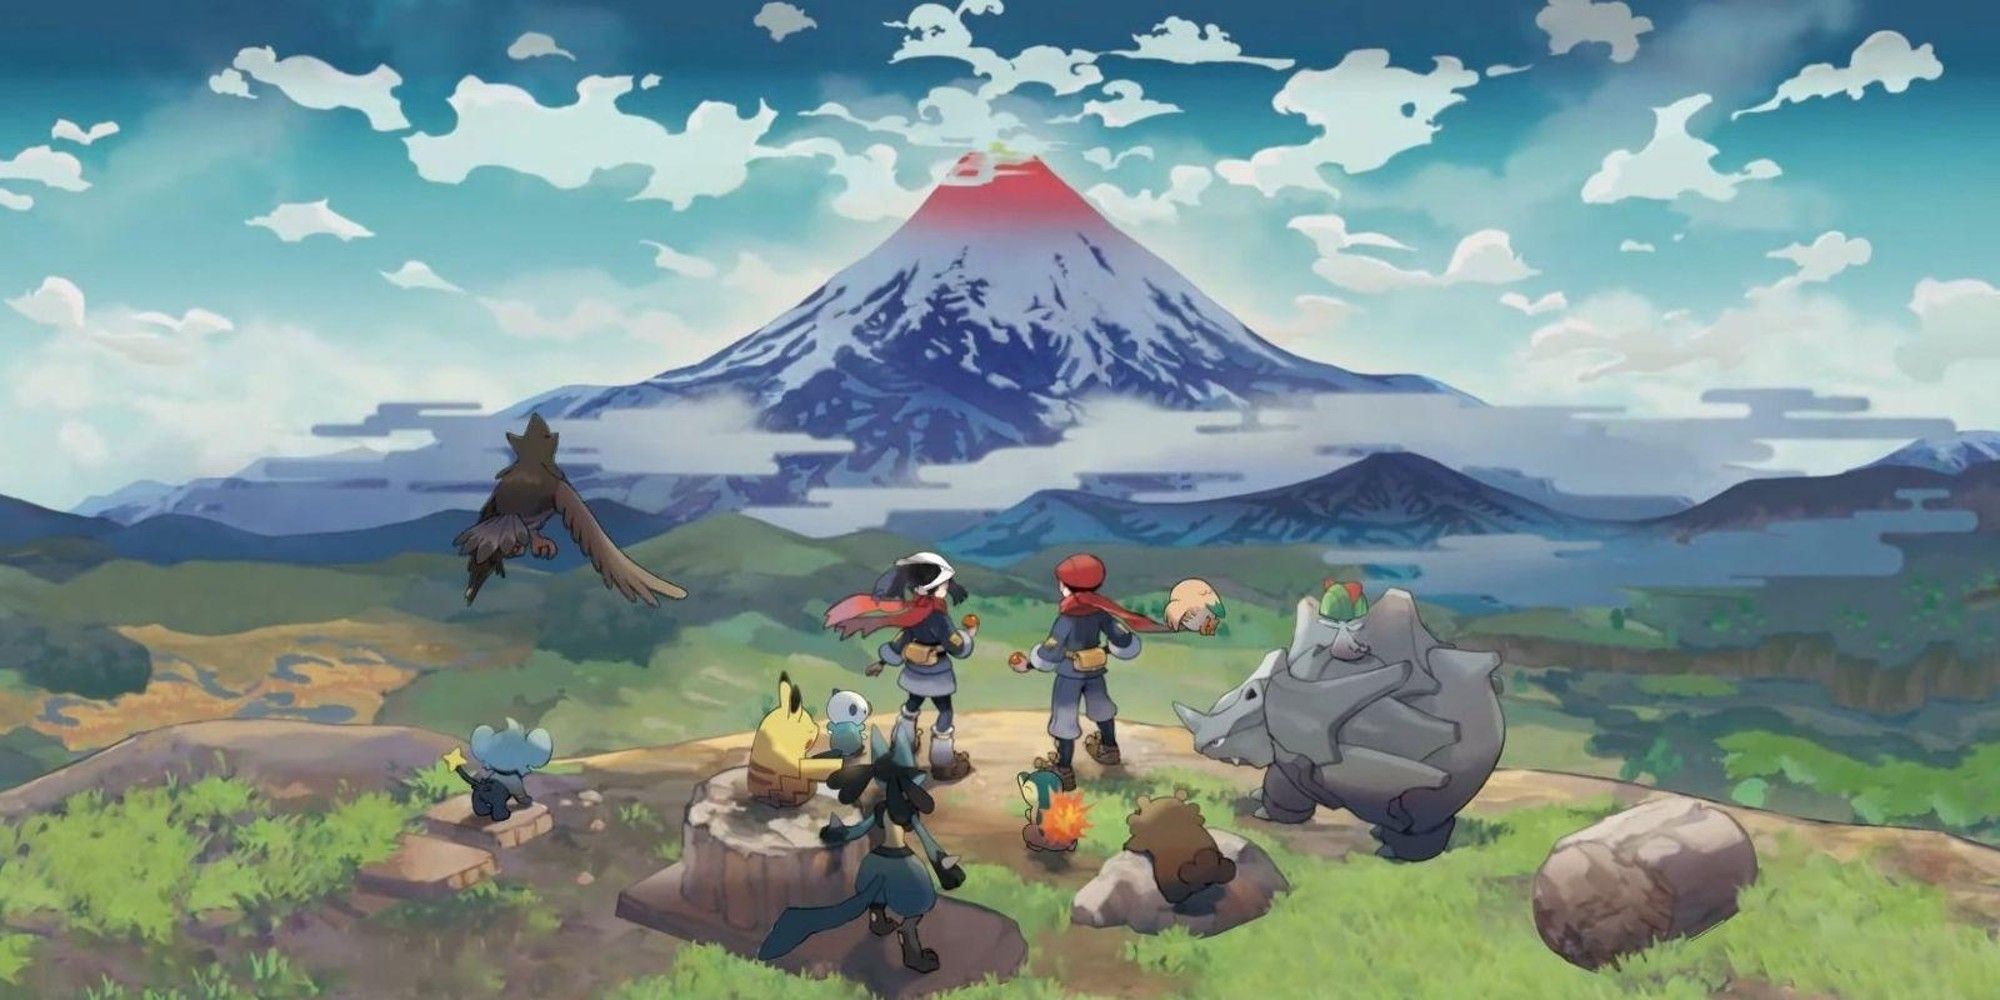 Pokémon Arceus legends: many new features in the extended gameplay trailer